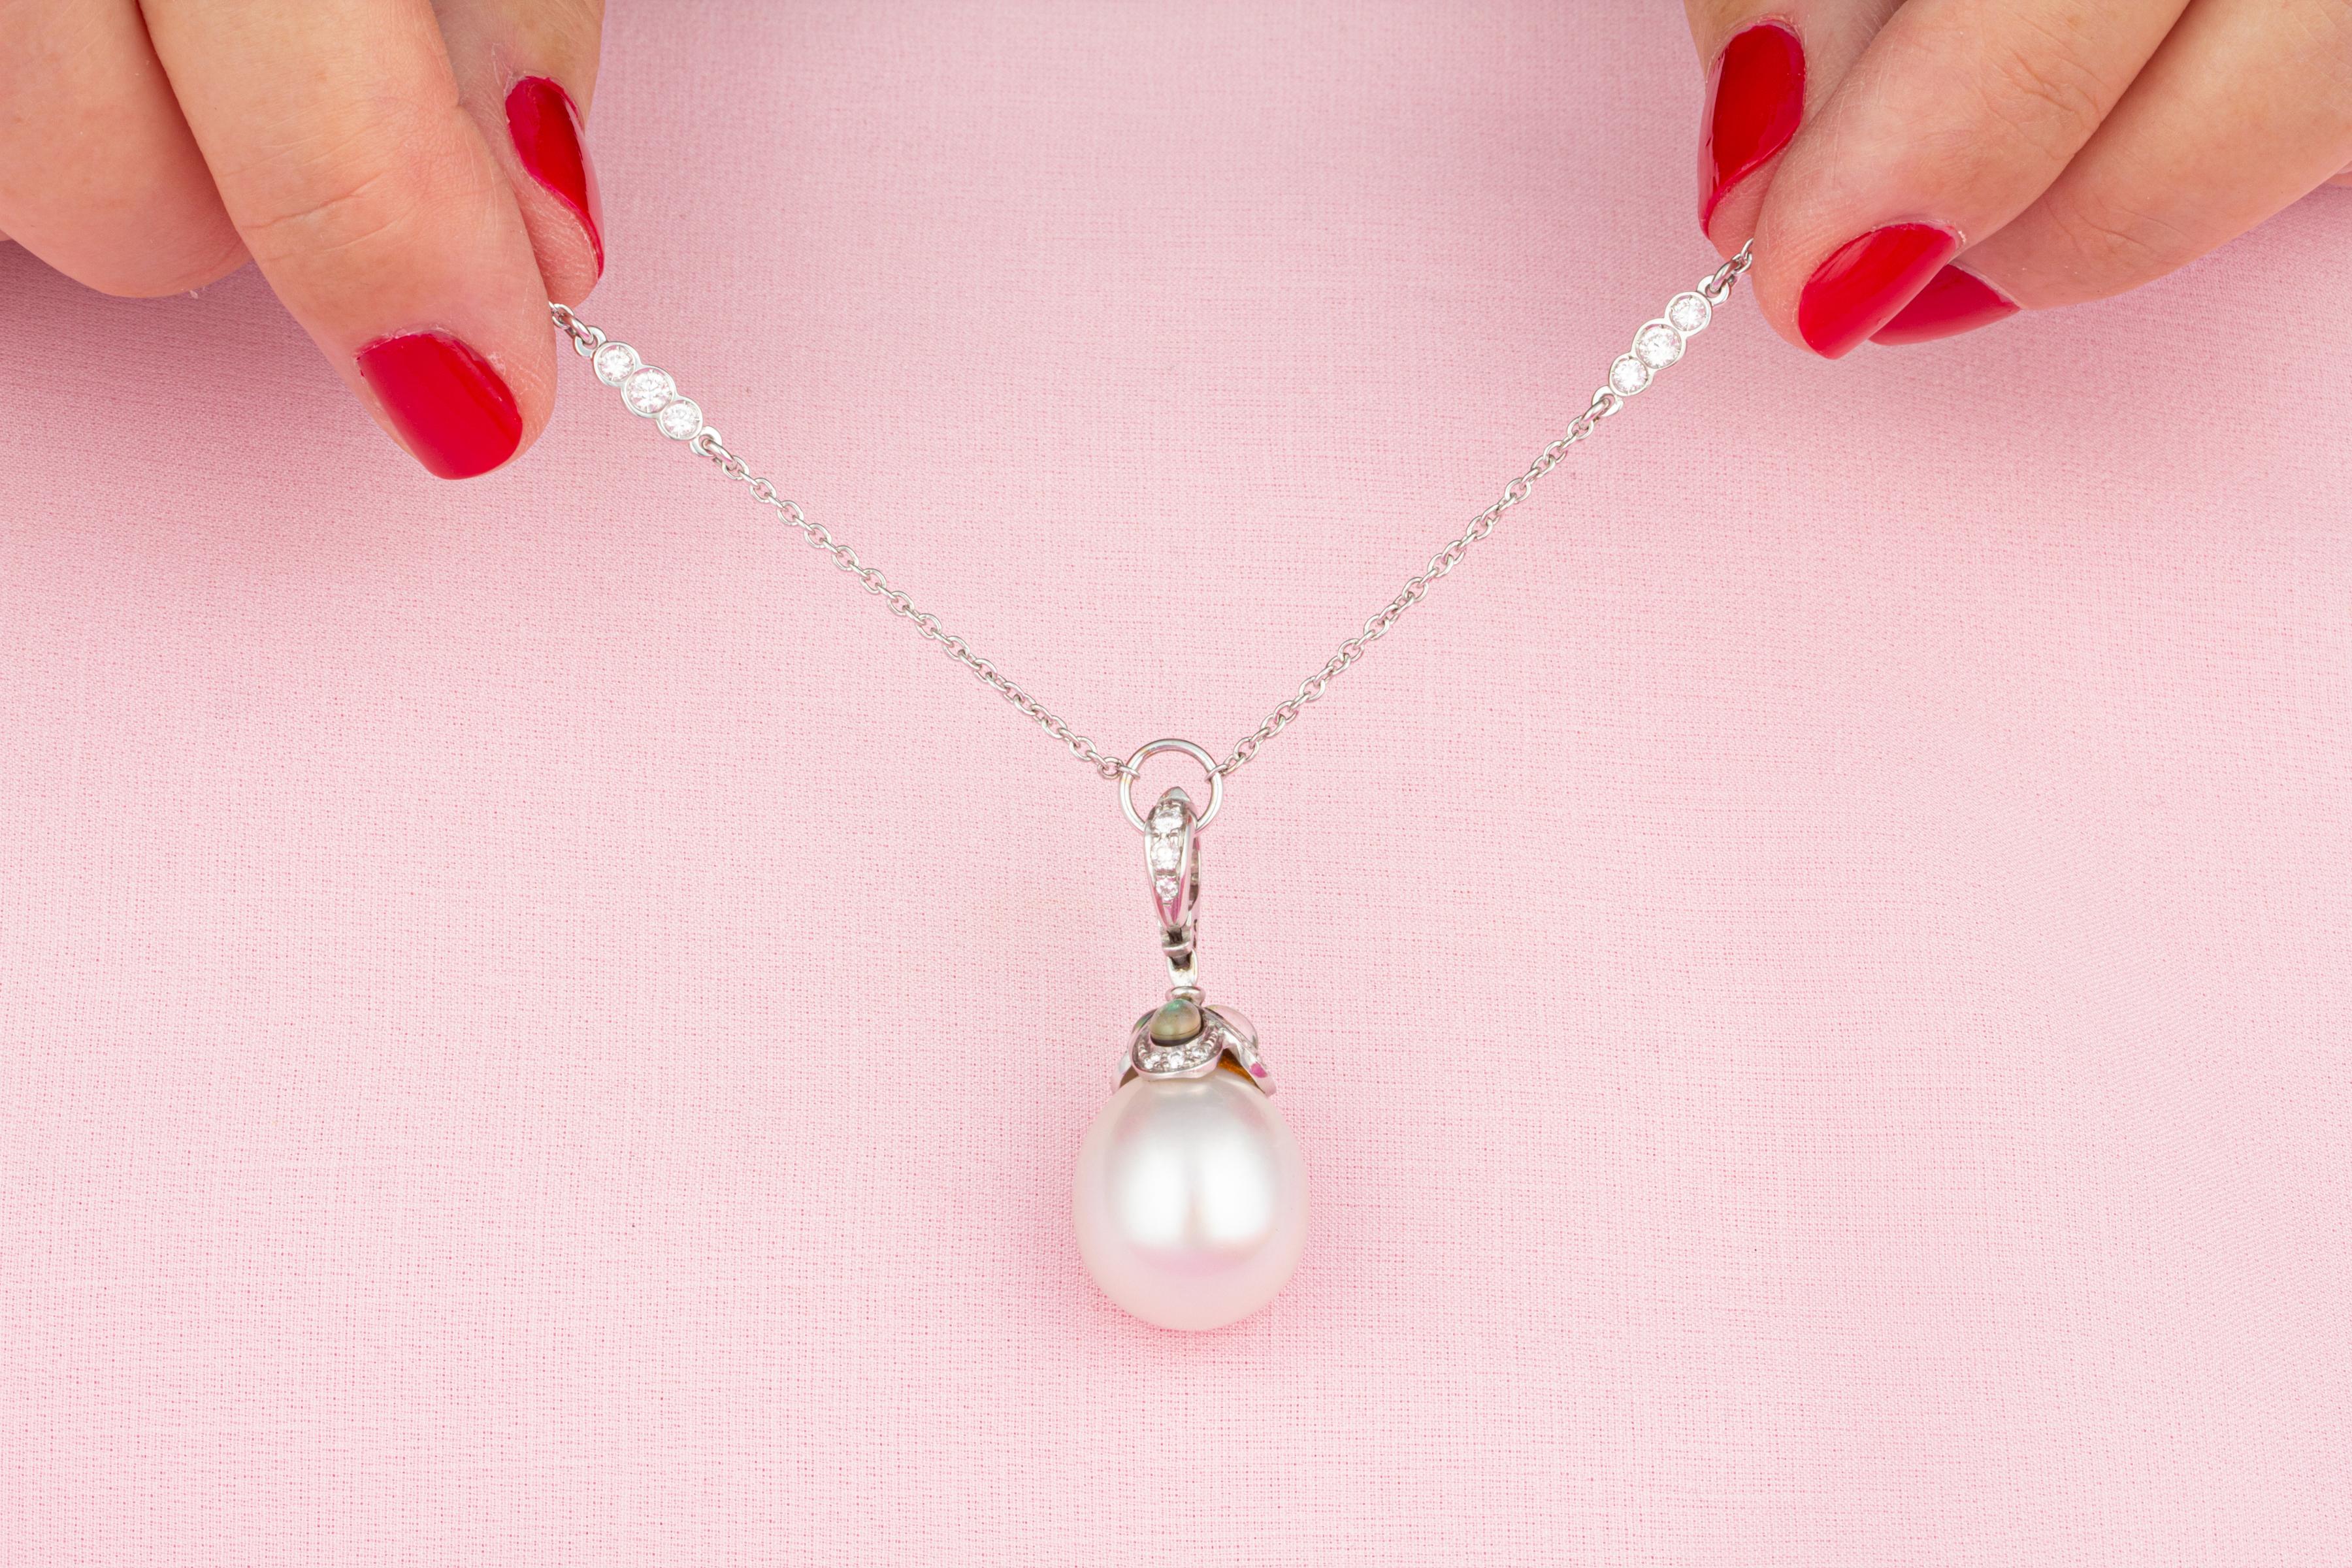 Round Cut Ella Gafter White Pearl Pendant Necklace